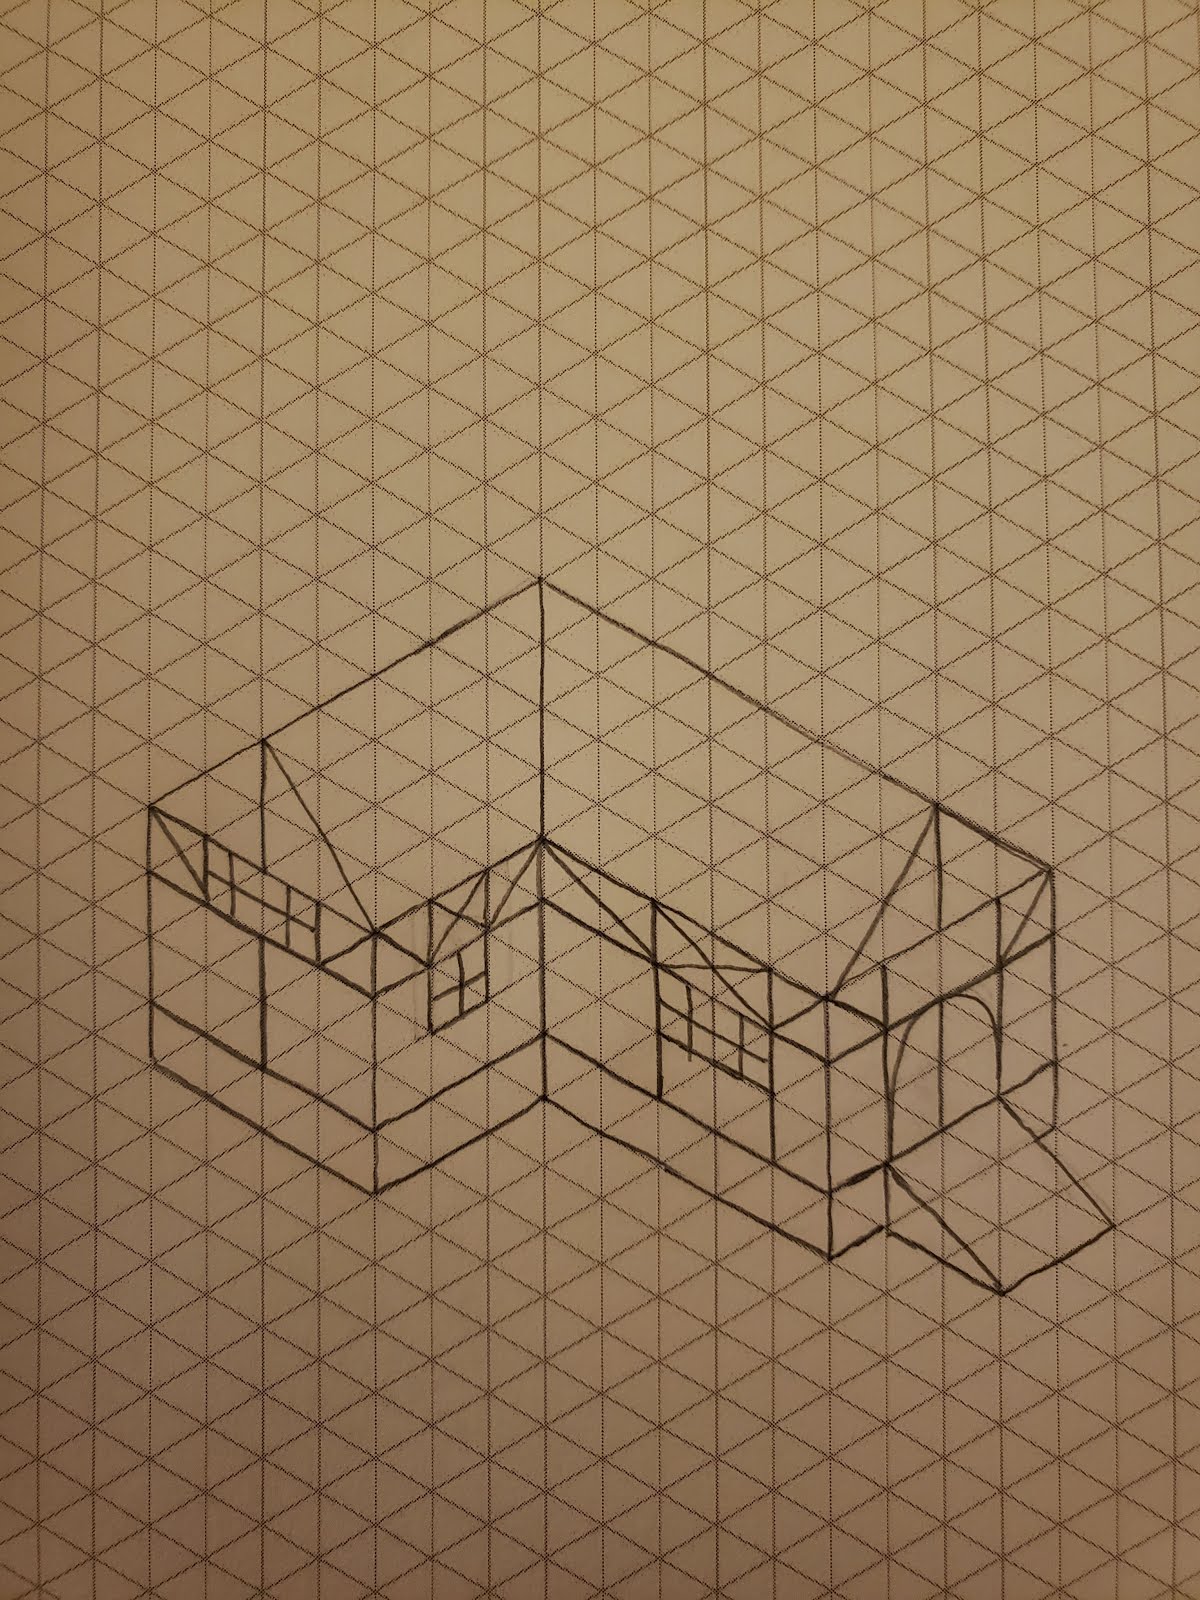 What about Isometric Drafting Paper